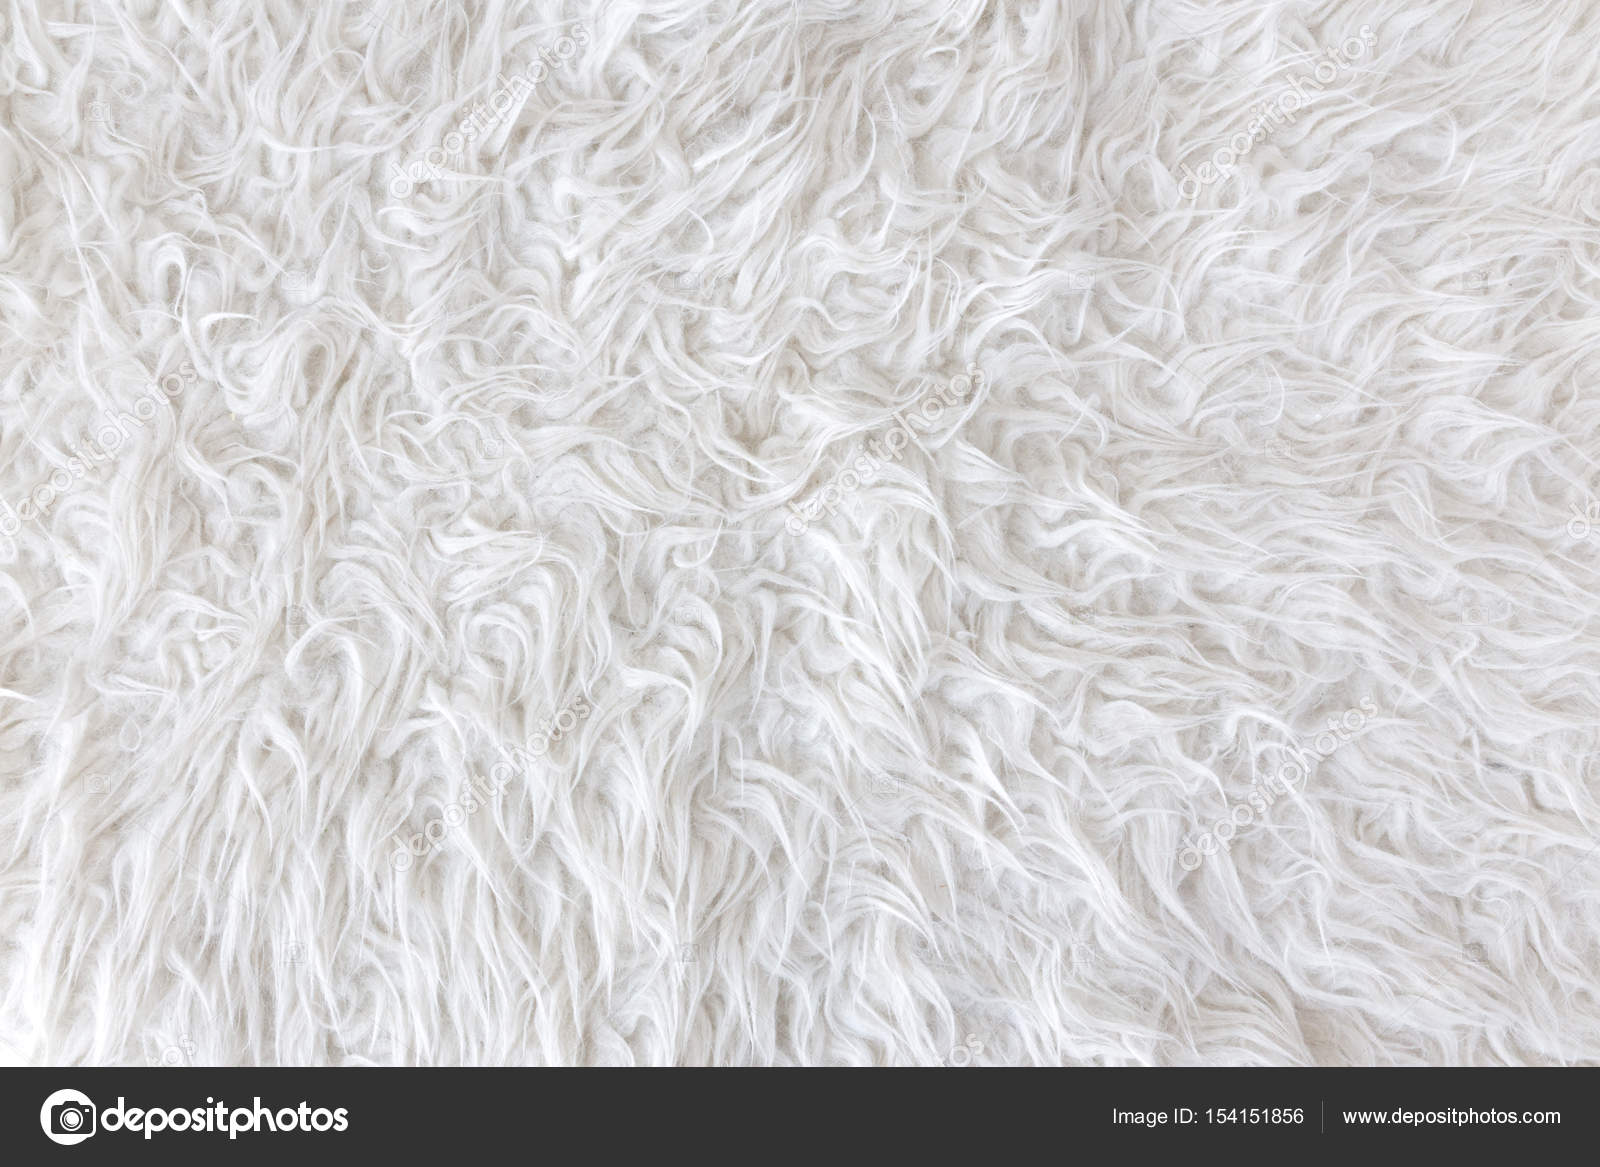 Cotton wool stock image. Image of background, backgrounds - 31369163